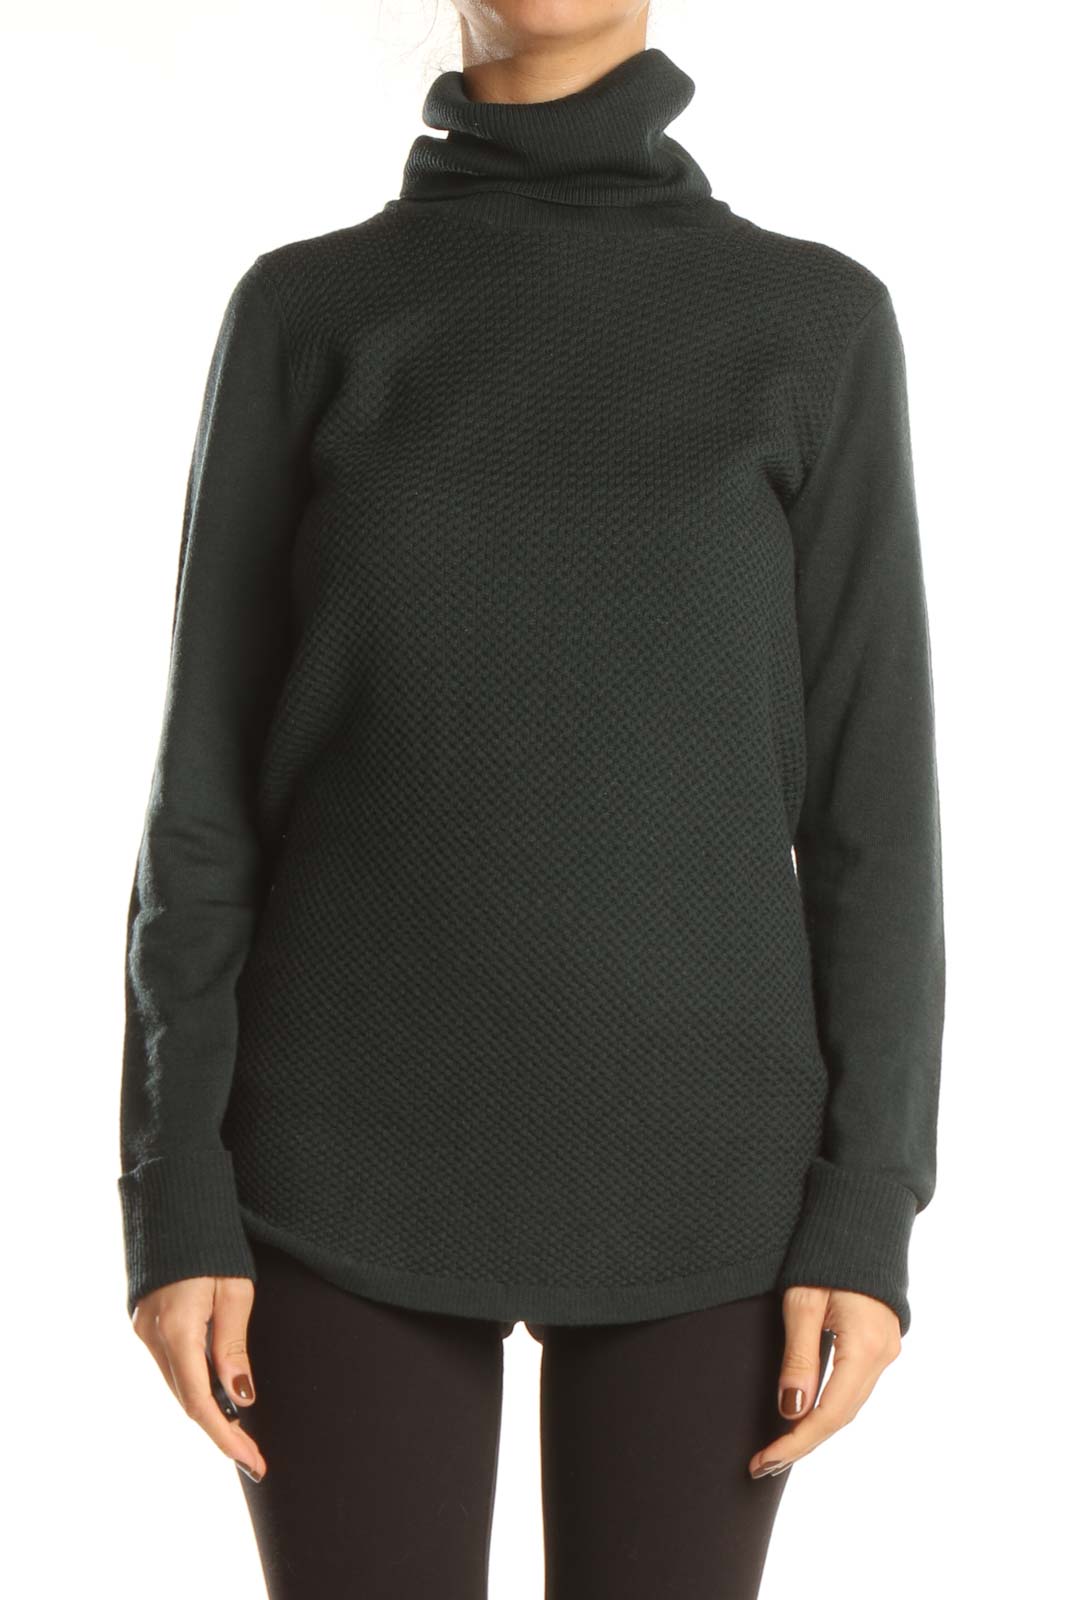 Black Turtleneck All Day Wear Sweater Front